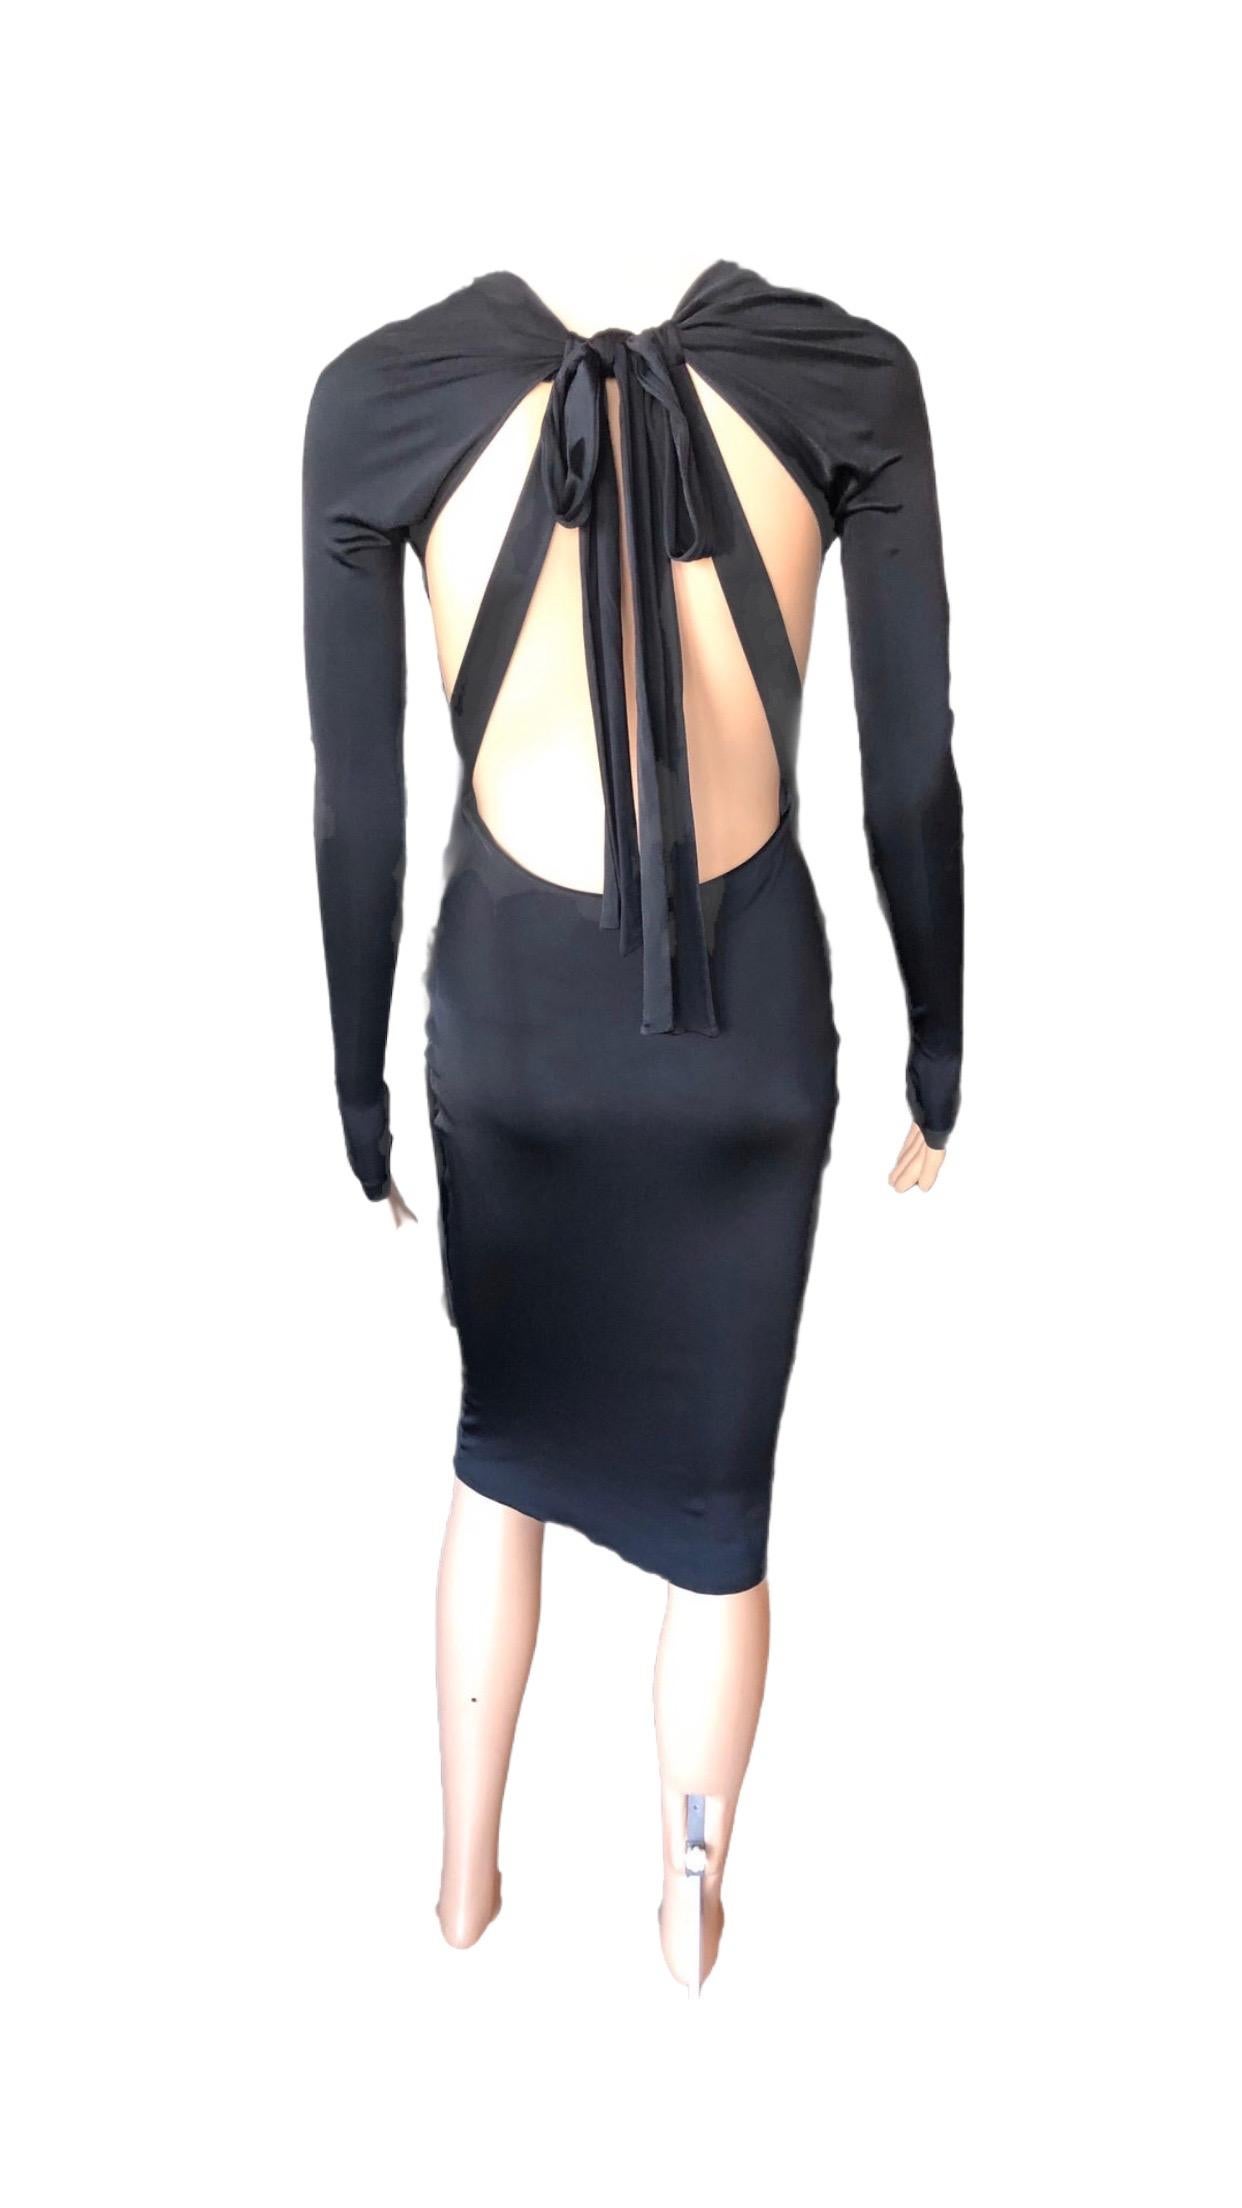 Gucci S/S 2005 Tom Ford Plunging Cutout Backless Bodycon Black Dress en vente 7